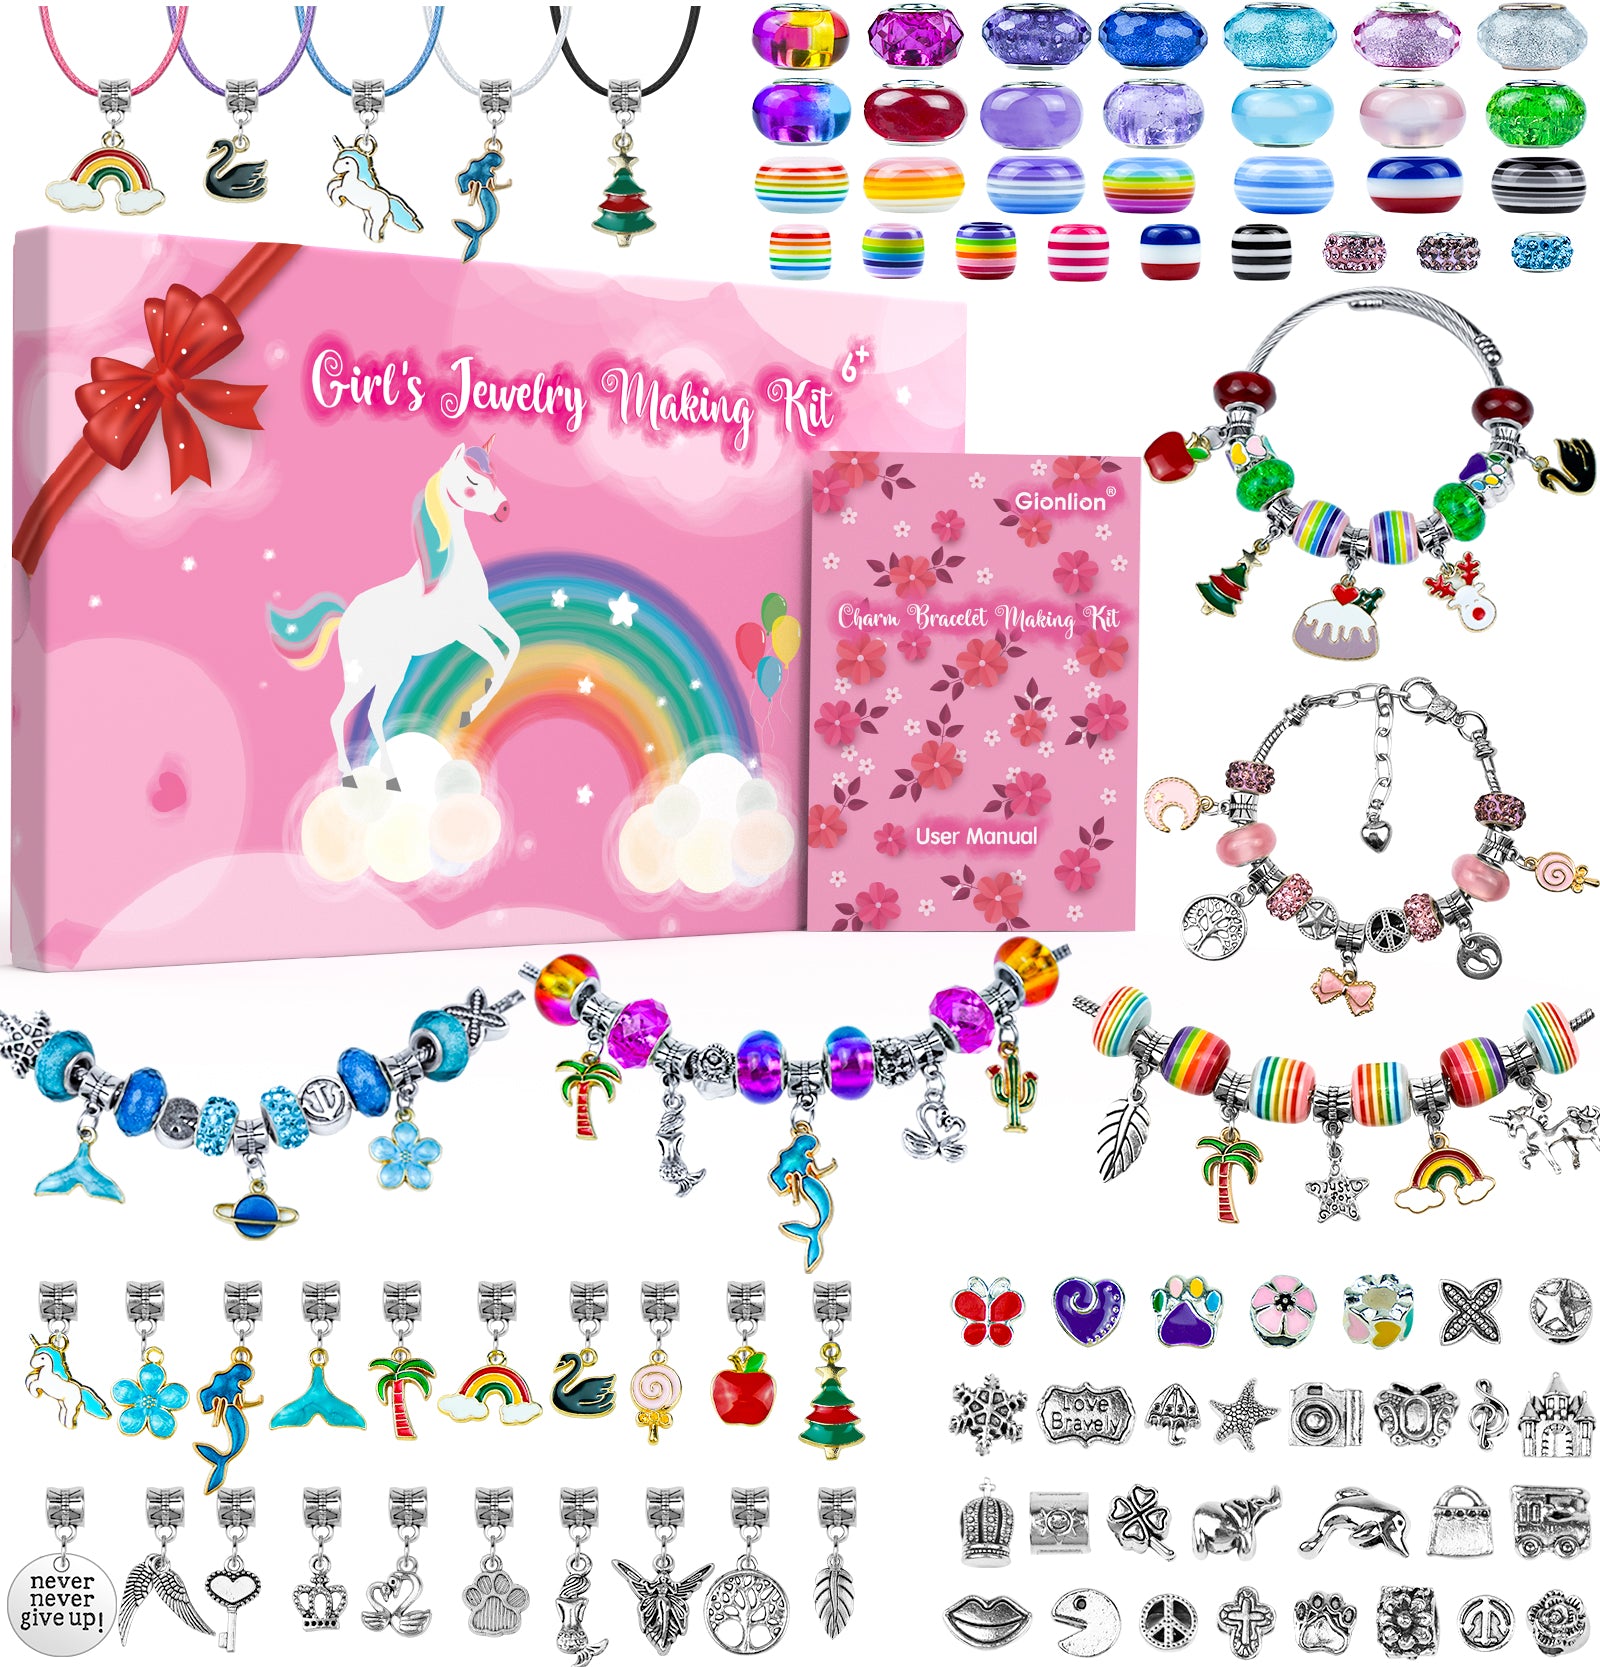 Charm Bracelet Making Kit for Teens Girls,Super Cute Jewelry Making Charms  Unicorn/Mermaid Crafts Gifts Set for Ages 8-12